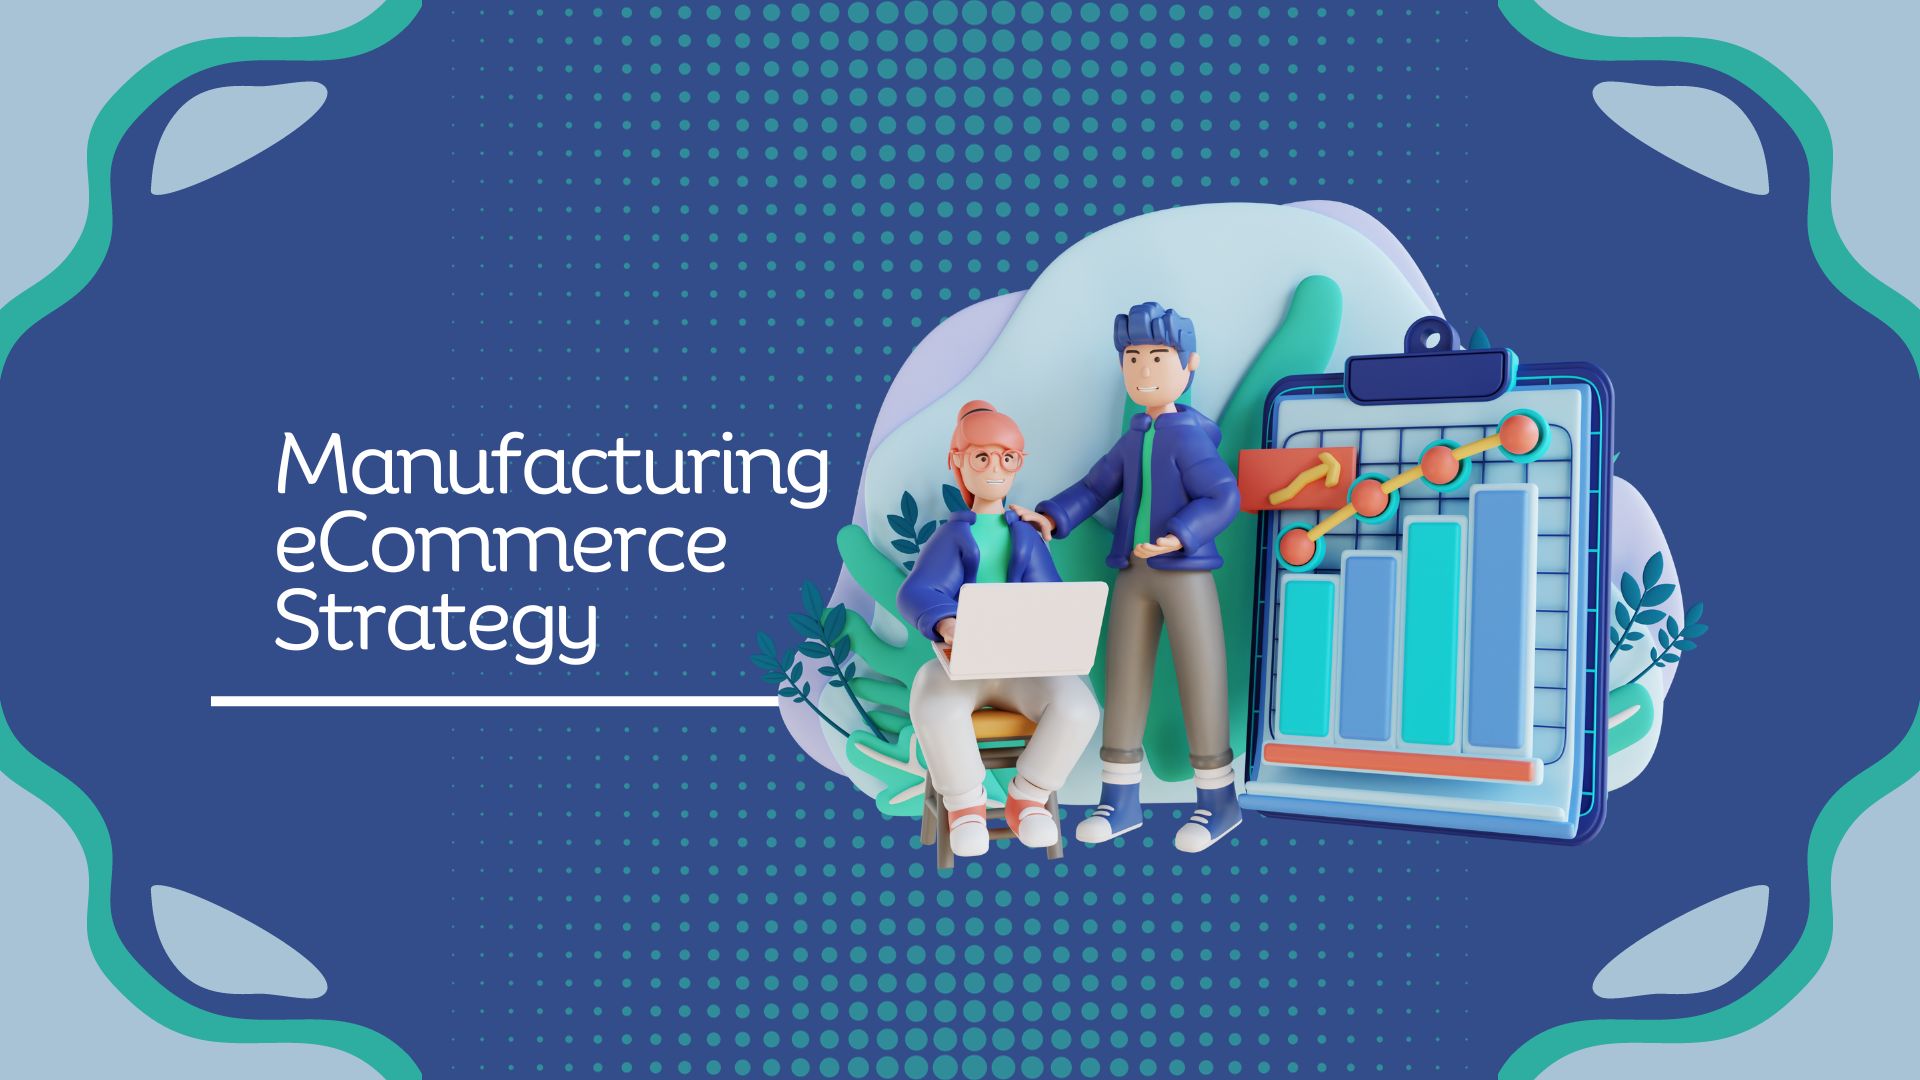 Building a Manufacturing eCommerce Strategy